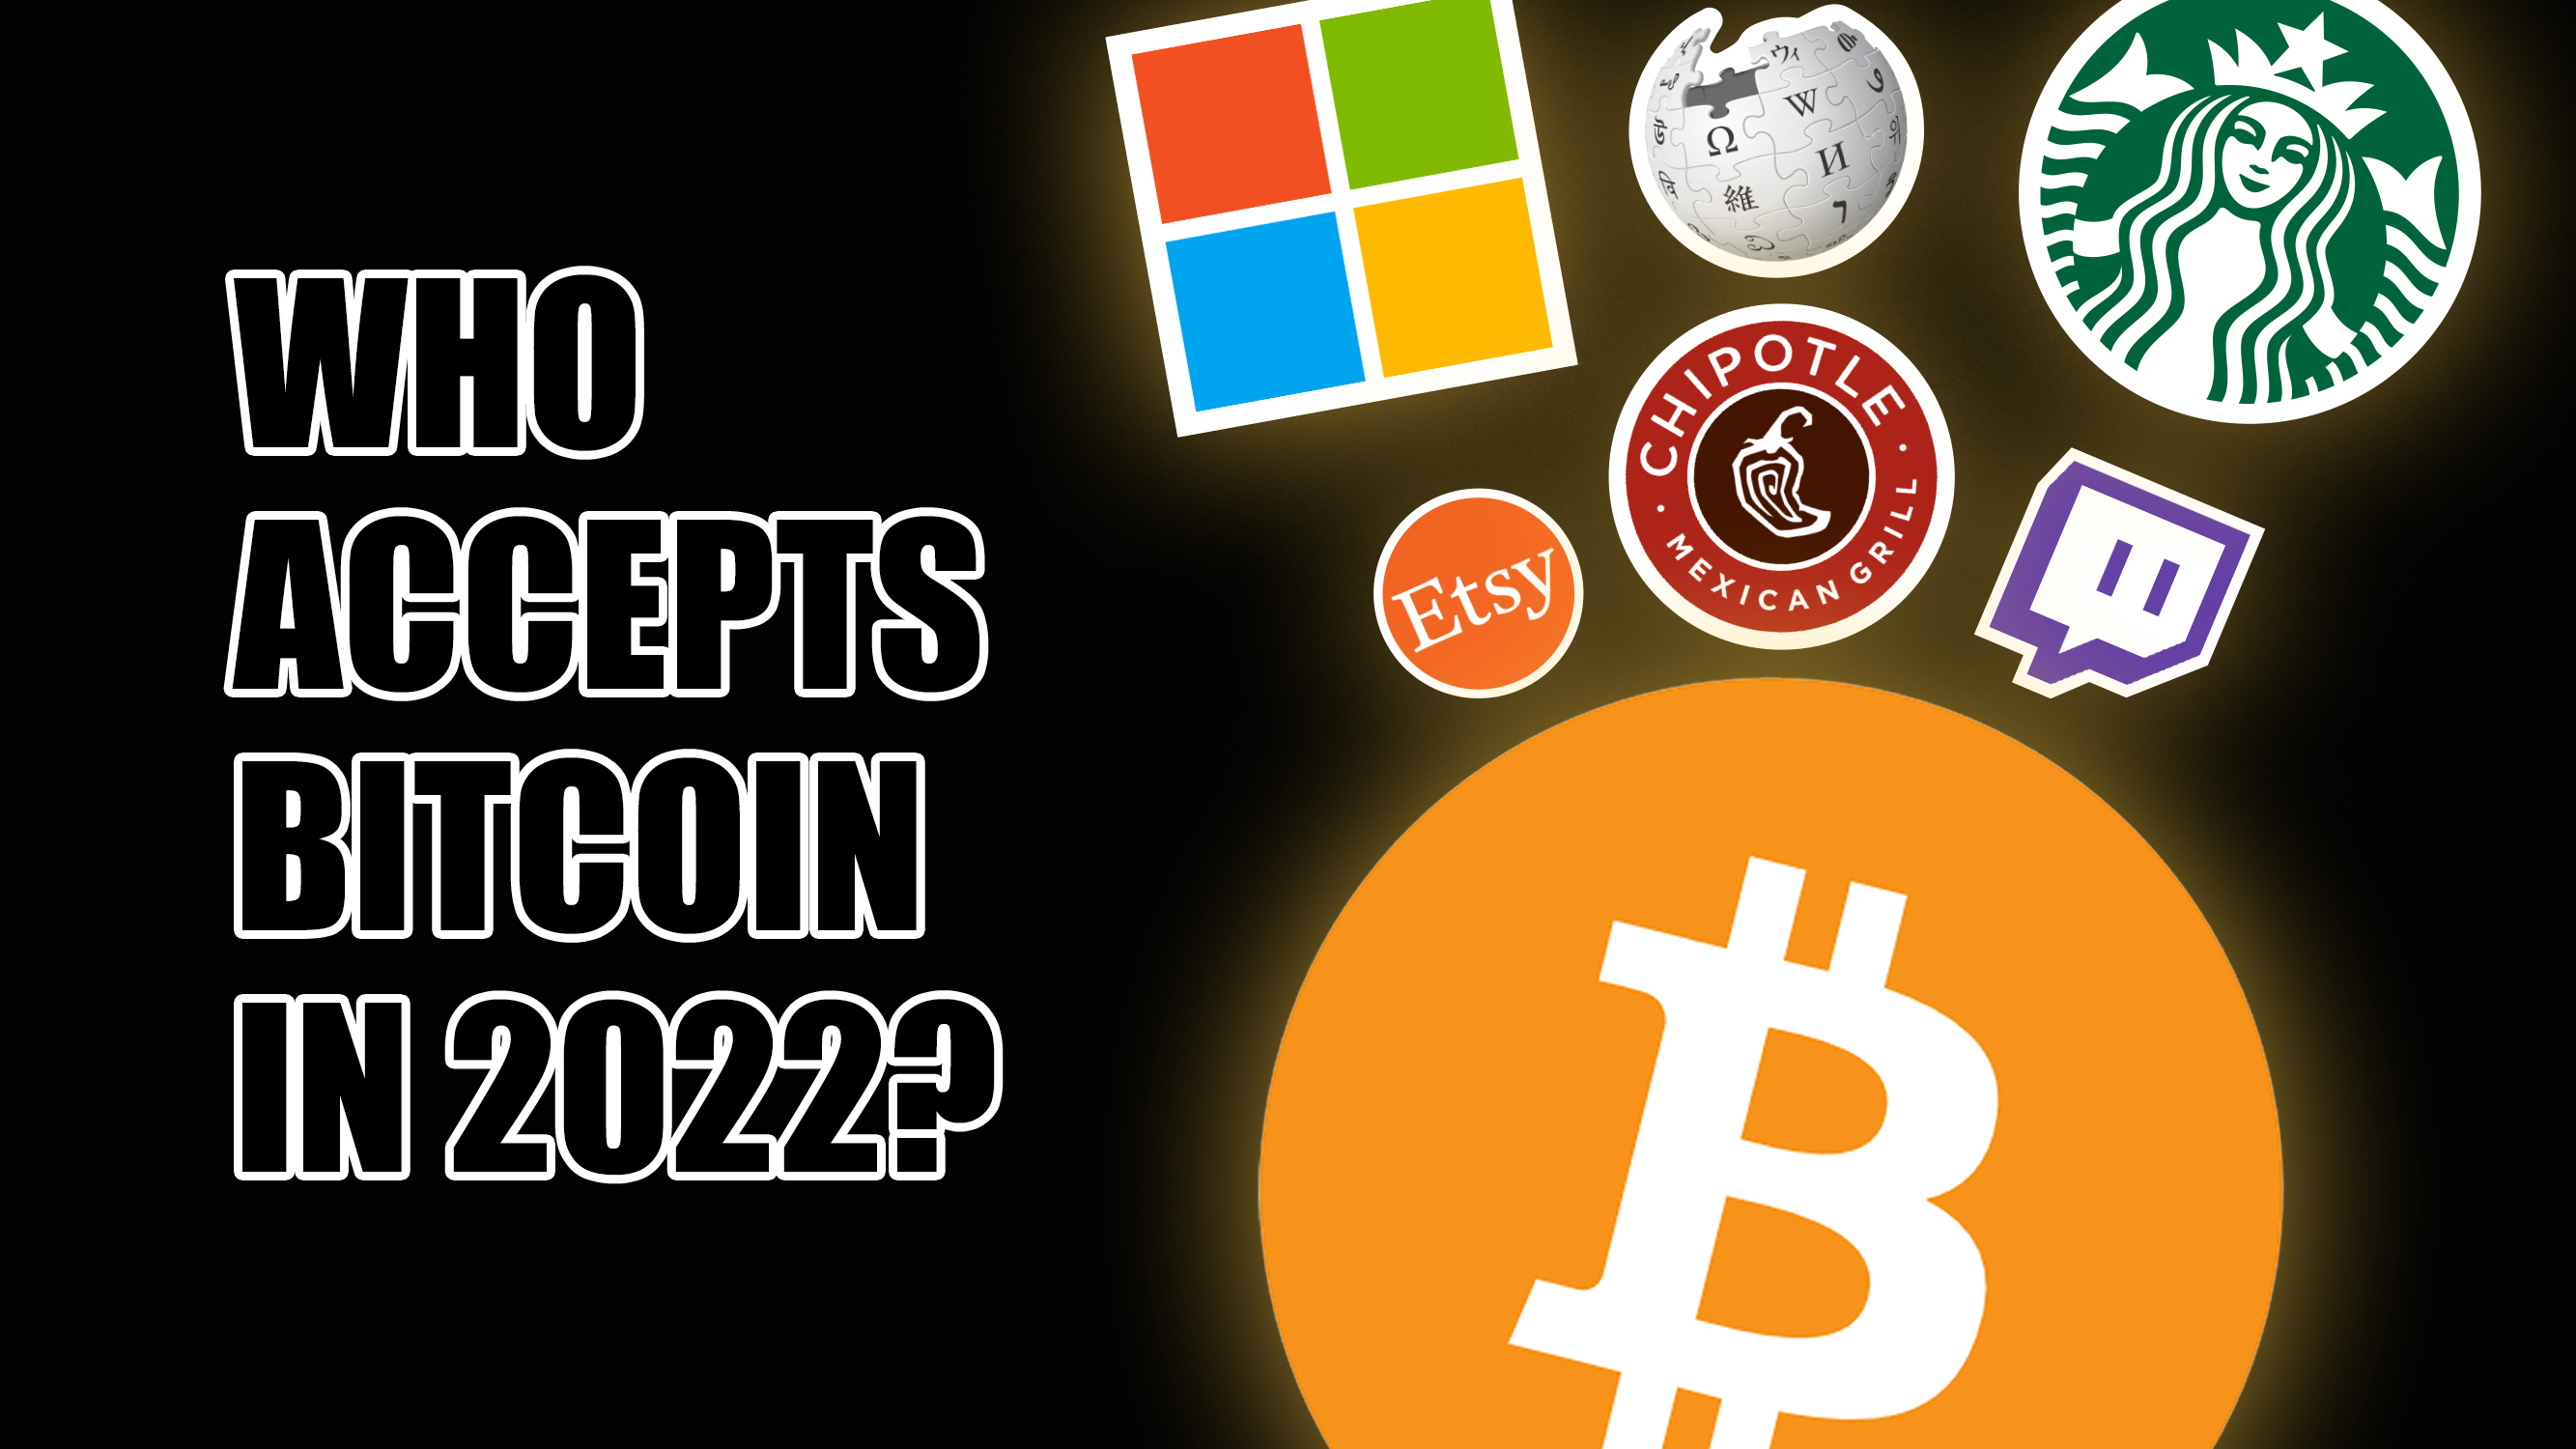 Cover Image for Here Are the Businesses Who Accept Bitcoin as Payment in 2022